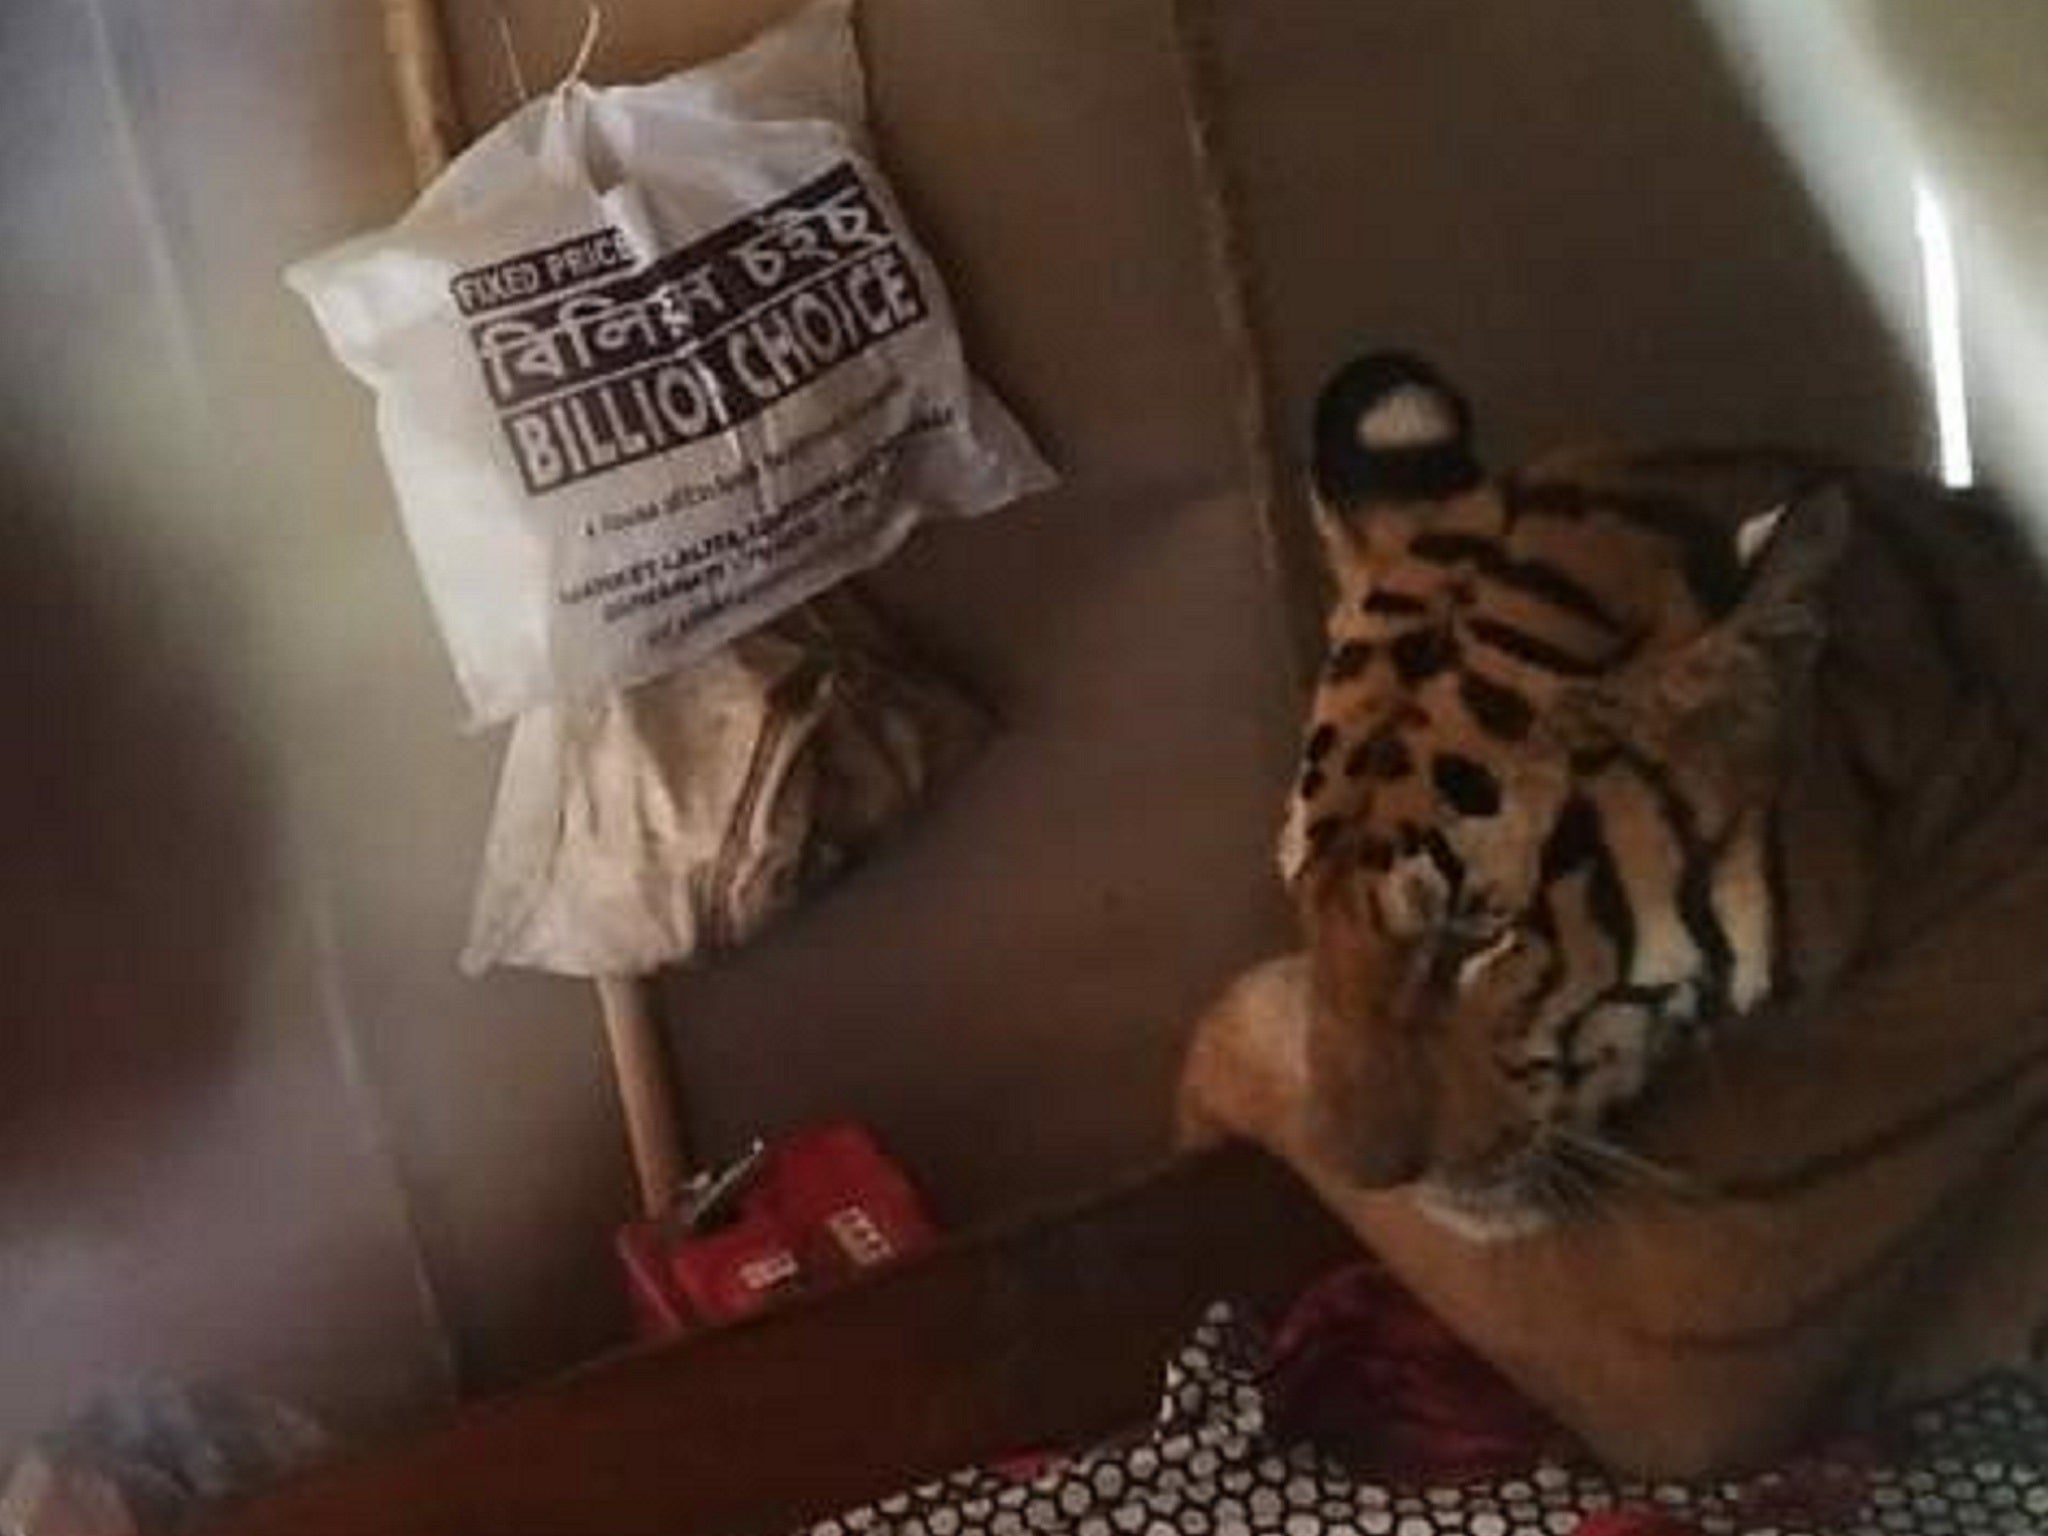 Tiger found lying on bed inside house while sheltering from India floods |  The Independent | The Independent